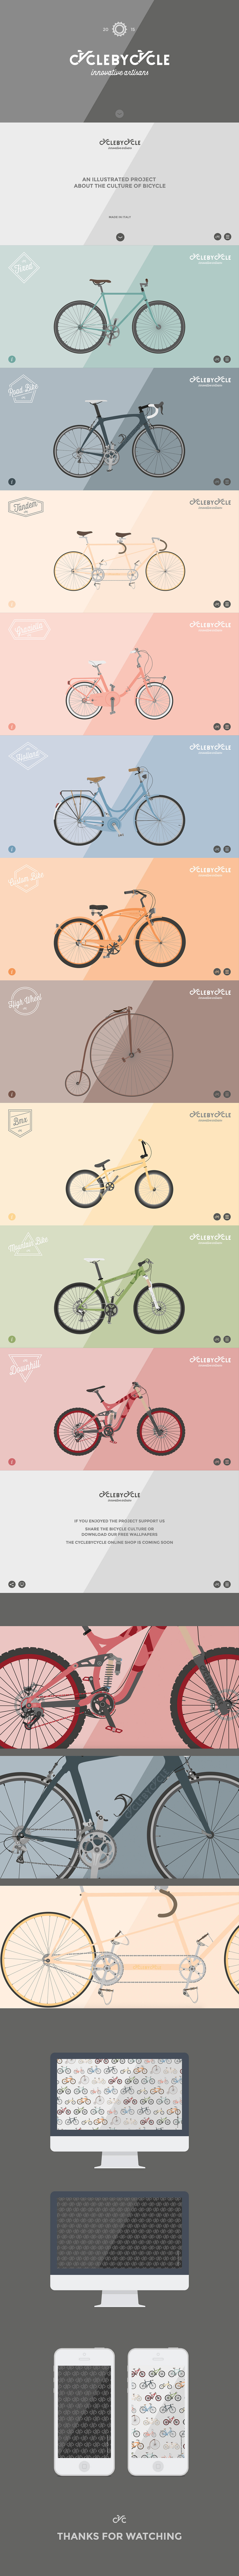 cycle Bicycle lifestyle fullscreen flat design Bike history One Page made in italy wallpaper bike culture colorfull innovative artisans Innovative